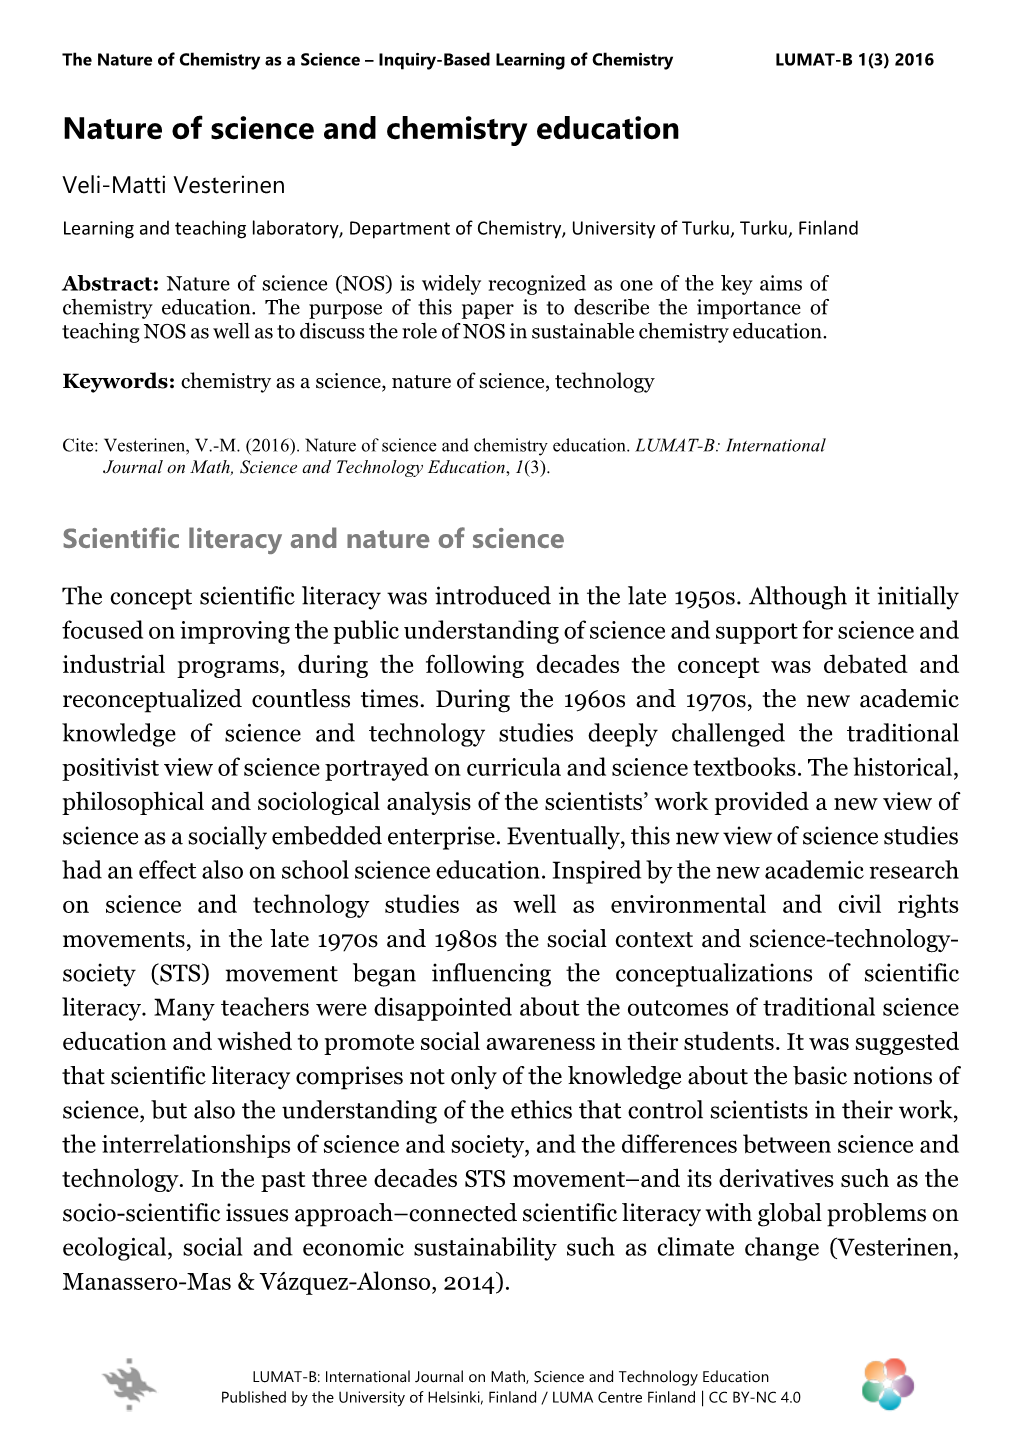 Nature of Science and Chemistry Education